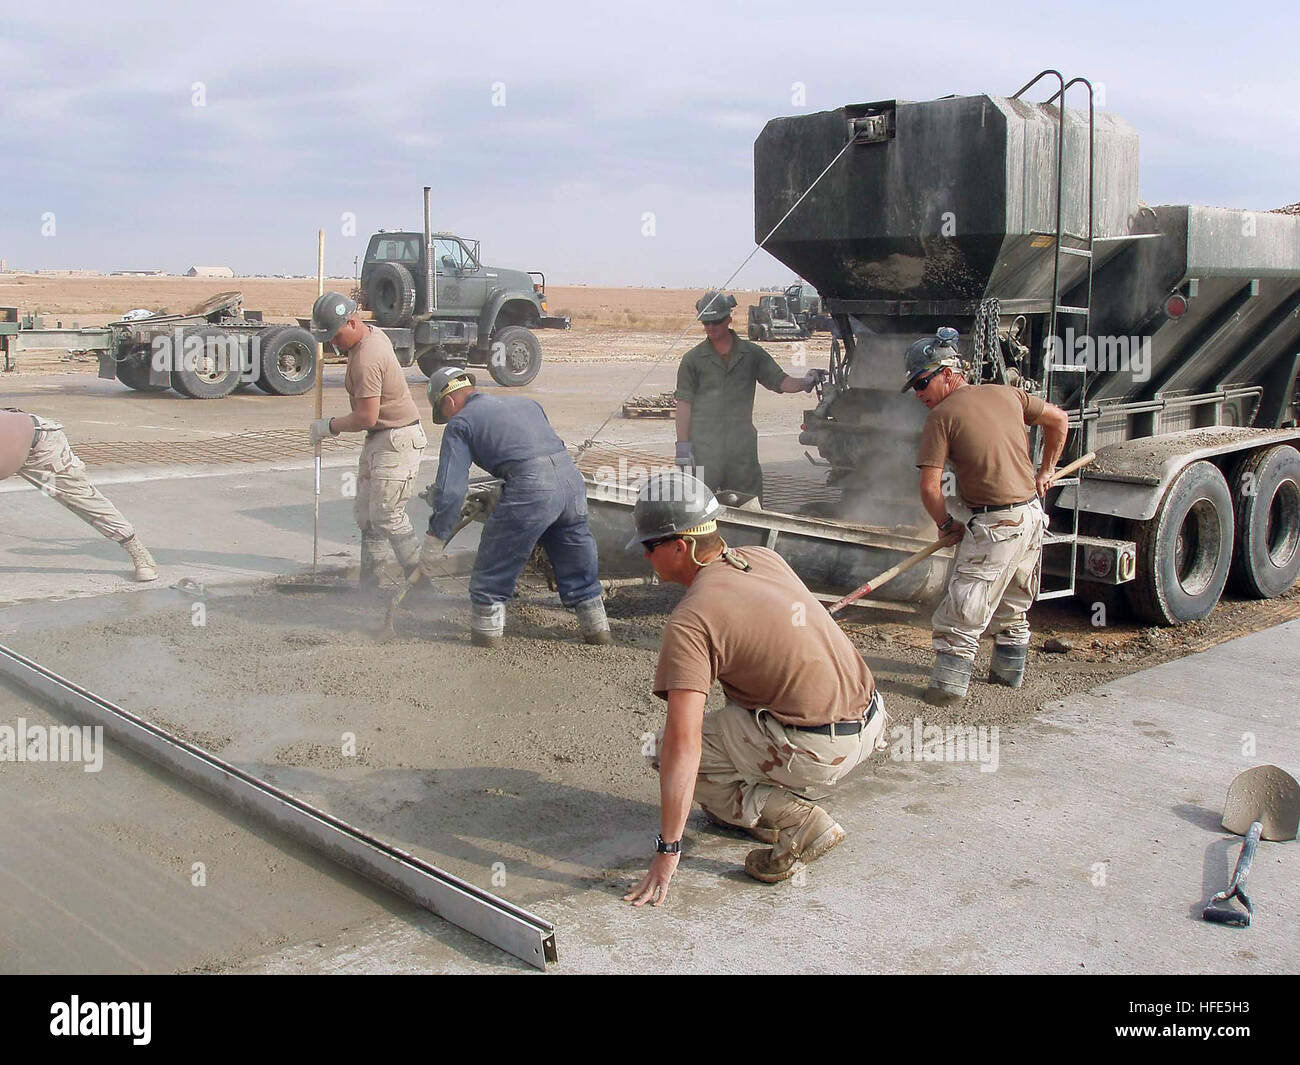 041119-N-5386H-027 Al Asad, Iraq (Nov. 19, 2004) - Reserve Seabees assigned to Naval Mobile Construction Battalion Two Three (NMCB-23), pour concrete as they work to complete an extensive repair job which includes making permanent repairs to 39 swimming pool-size impact craters on different sections of the Al Asad airfield runways. The craters, a result of bombing during the 2003 invasion of Iraq, have left the airfield inoperable for more than a year. U.S. Navy photo by PhotographerÕs Mate 2nd Class Michael D. Heckman (RELEASED) US Navy 041119-N-5386H-027 Reserve Seabees assigned to Naval Mob Stock Photo